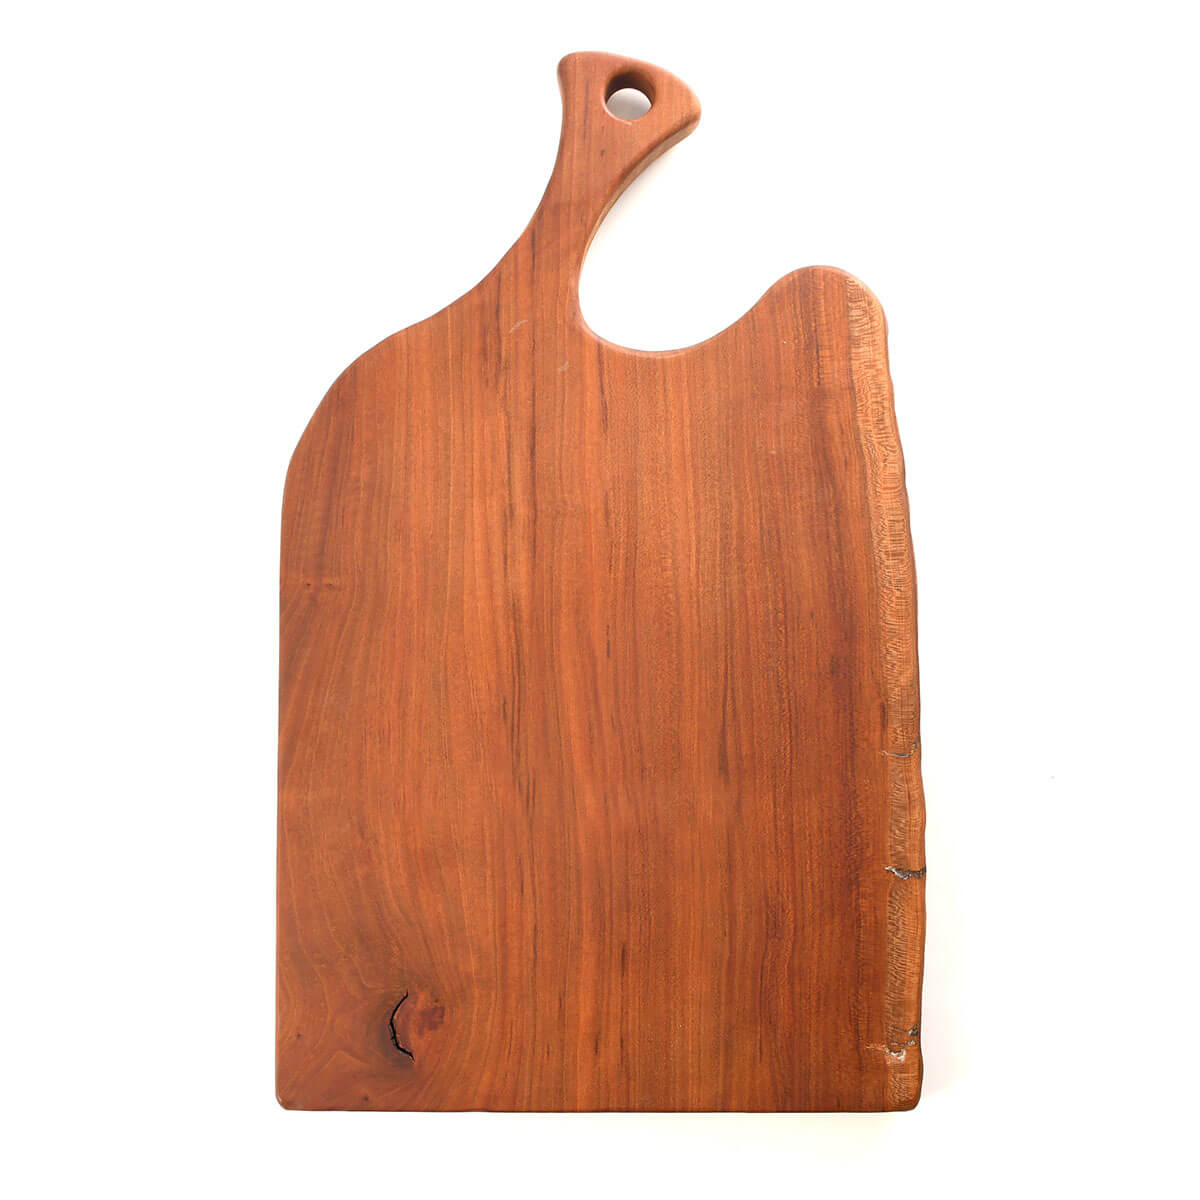 collection of live edge cutting board with handle, cherry and oak wood